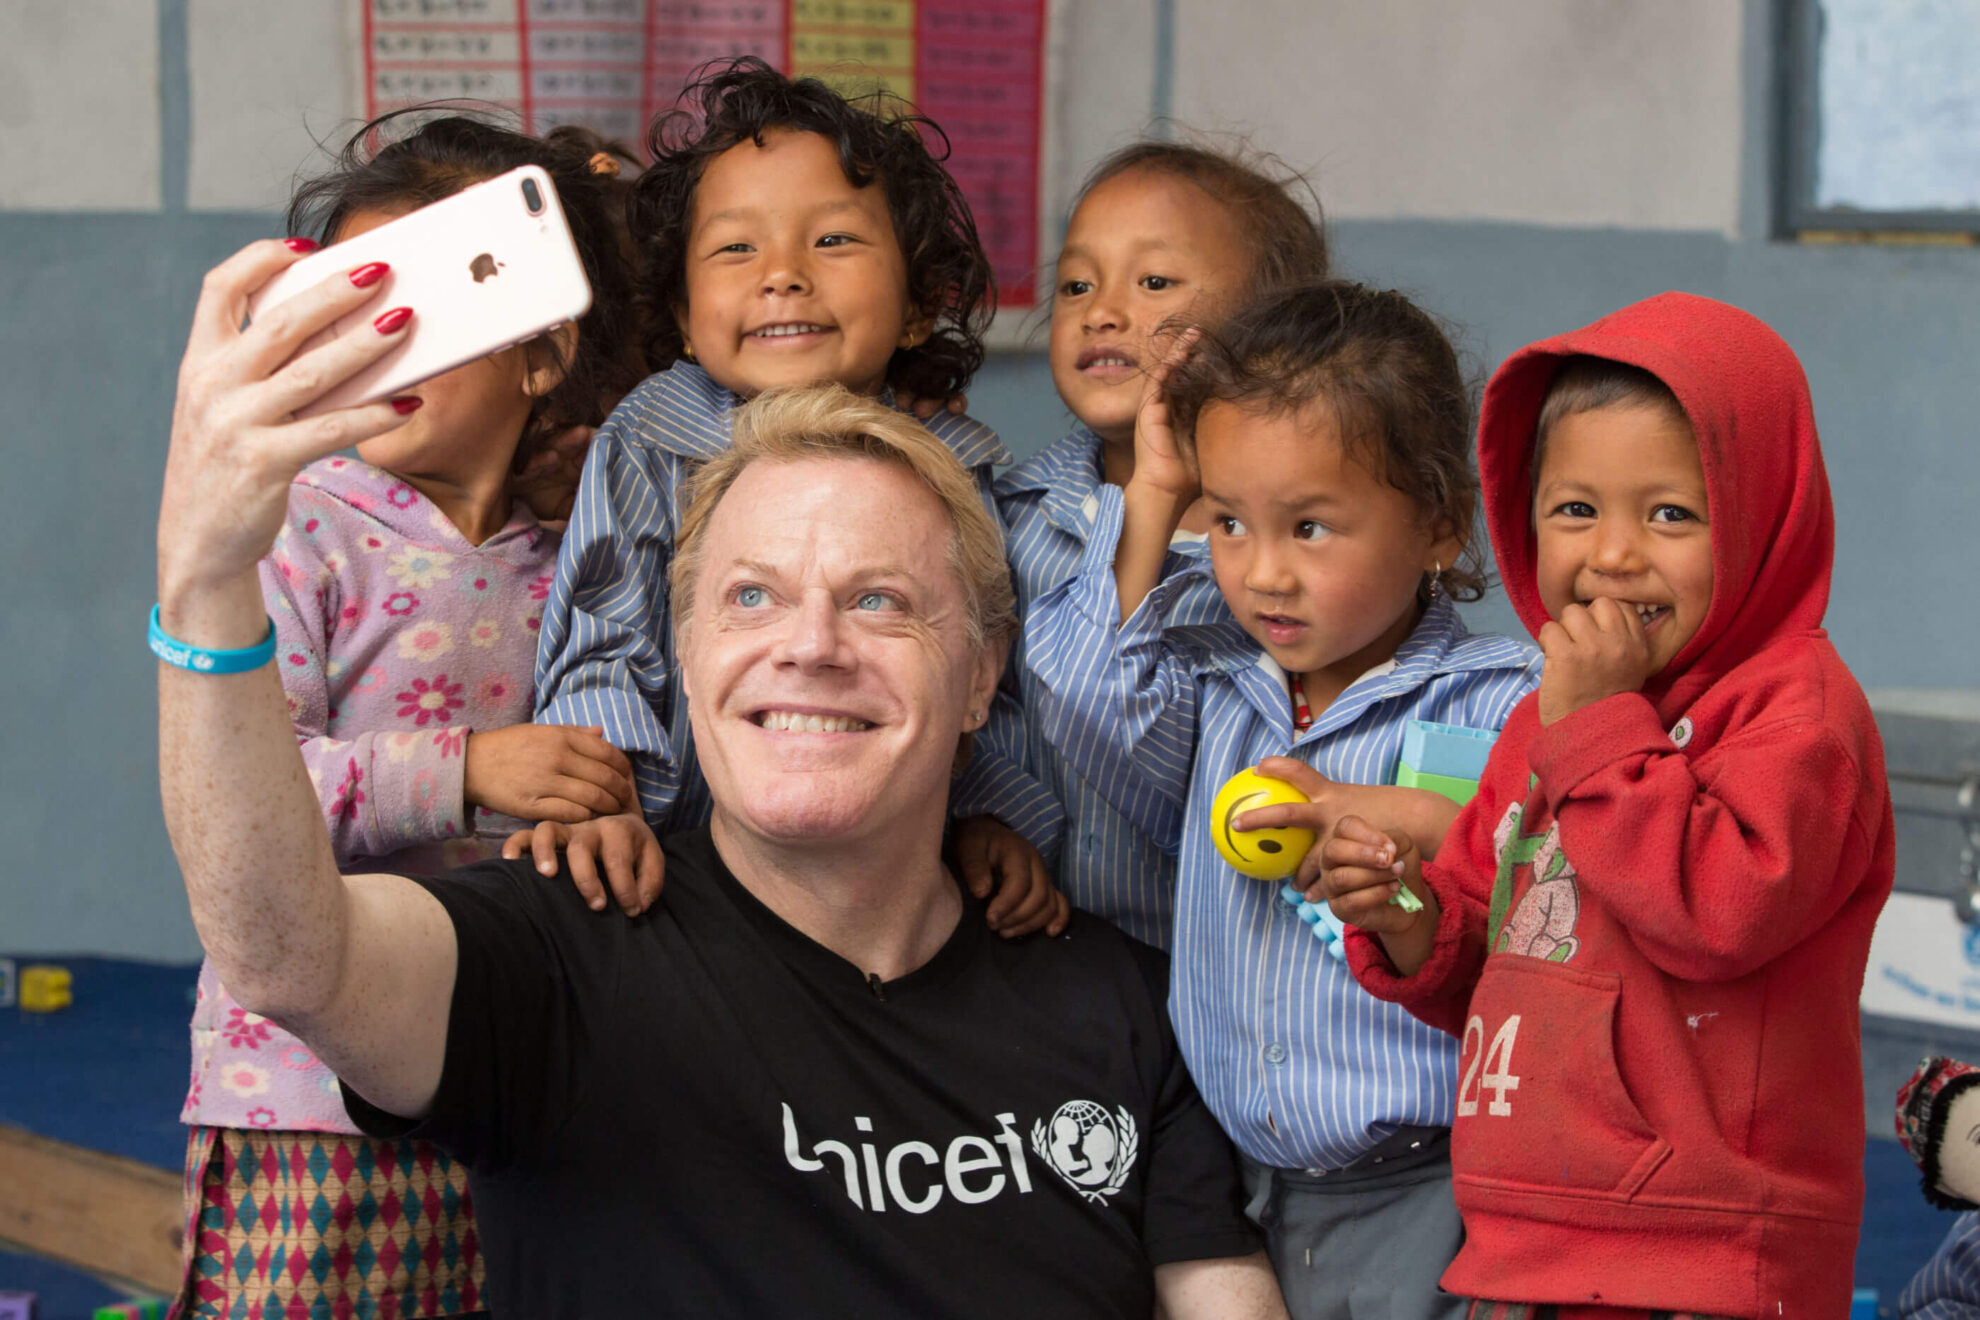 Unicef UK Ambassador Eddie Izzard visits Sree Shankheswori Primary School in Kabhrepalanchowk, Nepal. Following the devastating earthquakes of 2015, Shankheswori is one of 650 schools in the region that Unicef has helped by rebuilding damaged classrooms to ensure that children don’t miss out on their education. Unicef has also provided back-to-school kits with recreational and educational supplies, trained teachers to provide psycho-social support to traumatised pupils and taught them how to stay safe in the event of another earthquake. Kavrepalanchowk District, Nepal. 19th February 2017 © UNICEF/ Matas